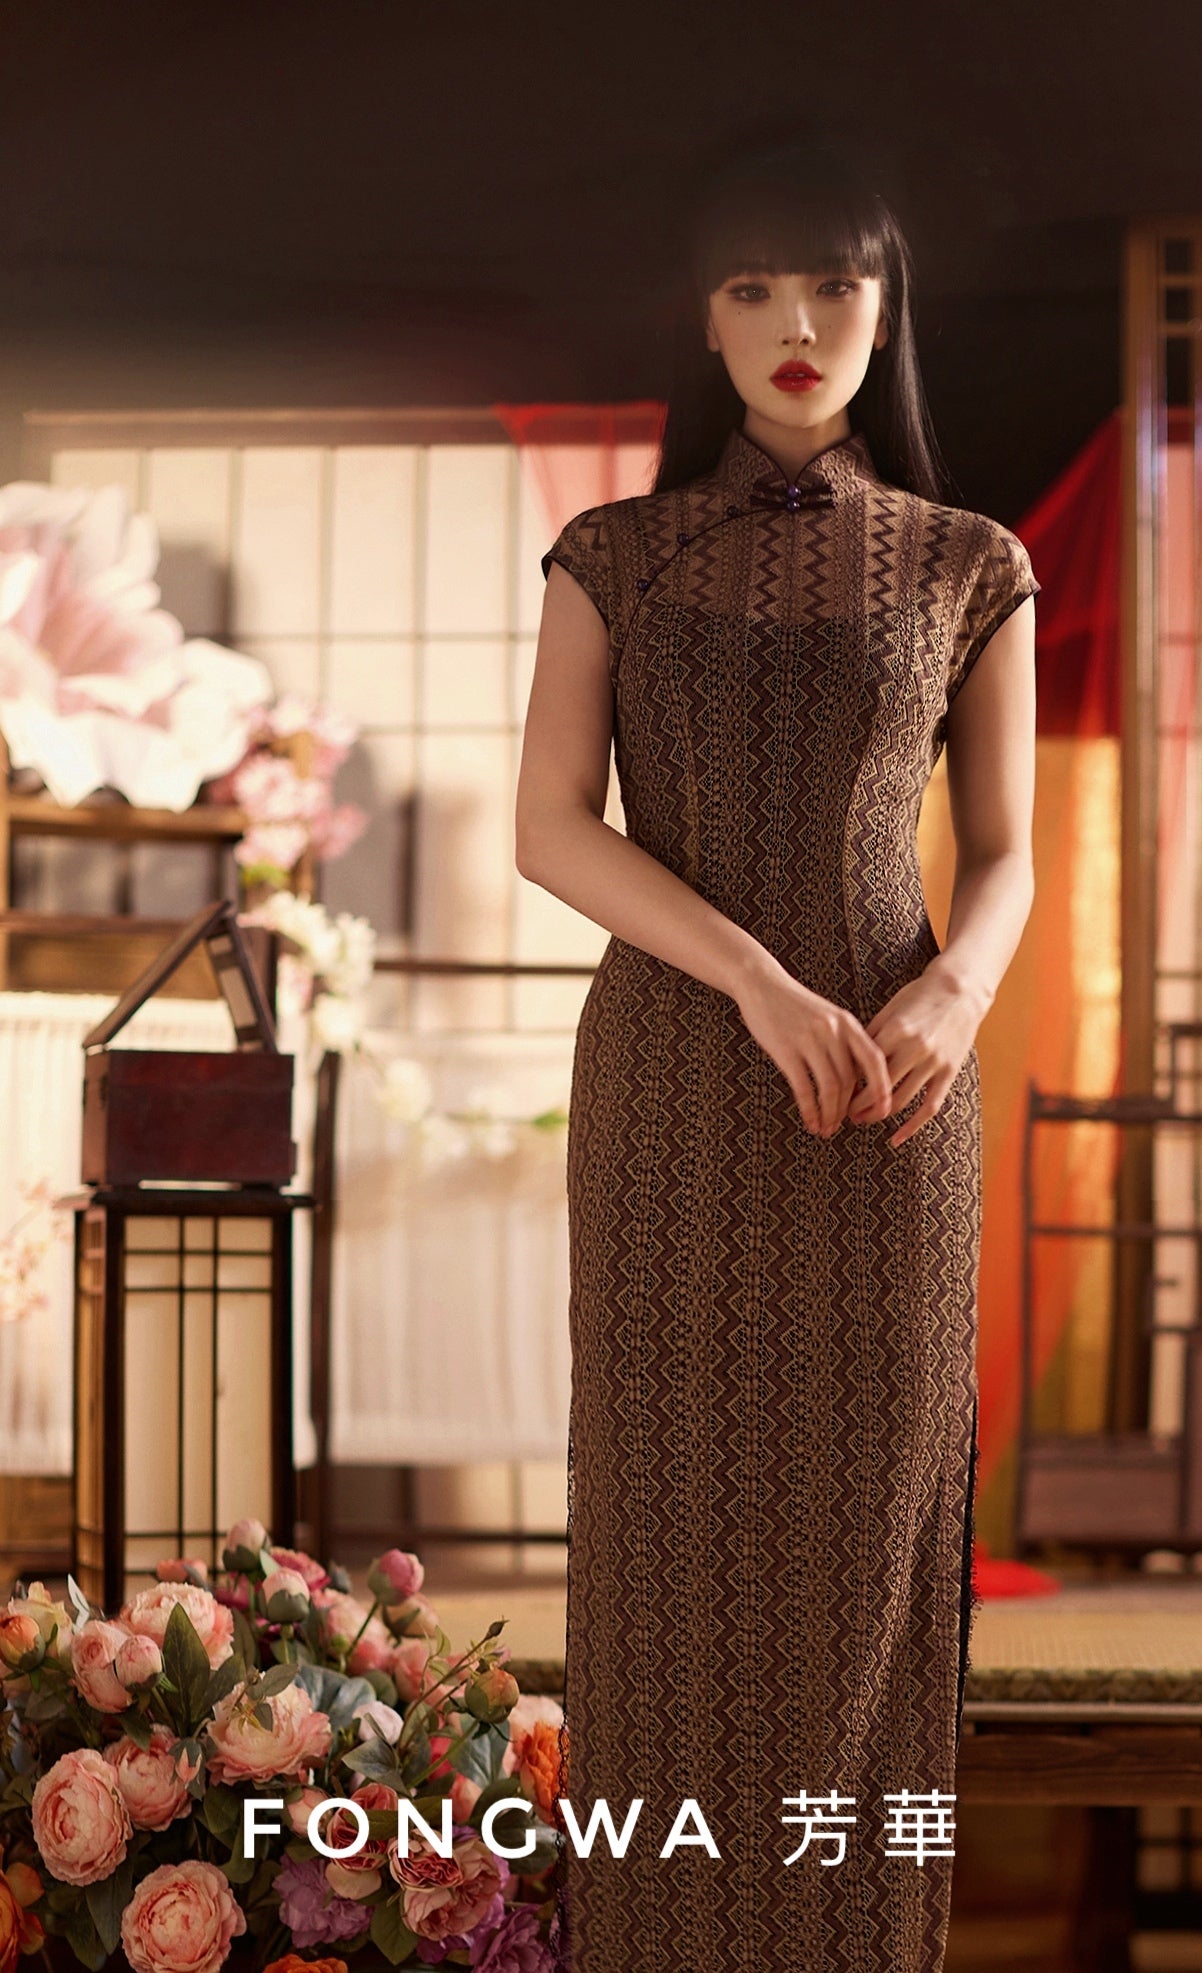 New Chinese-style Cheongsam, Daily Wear Cheongsam,  Independent Design Studio for New Chinese-style Clothing